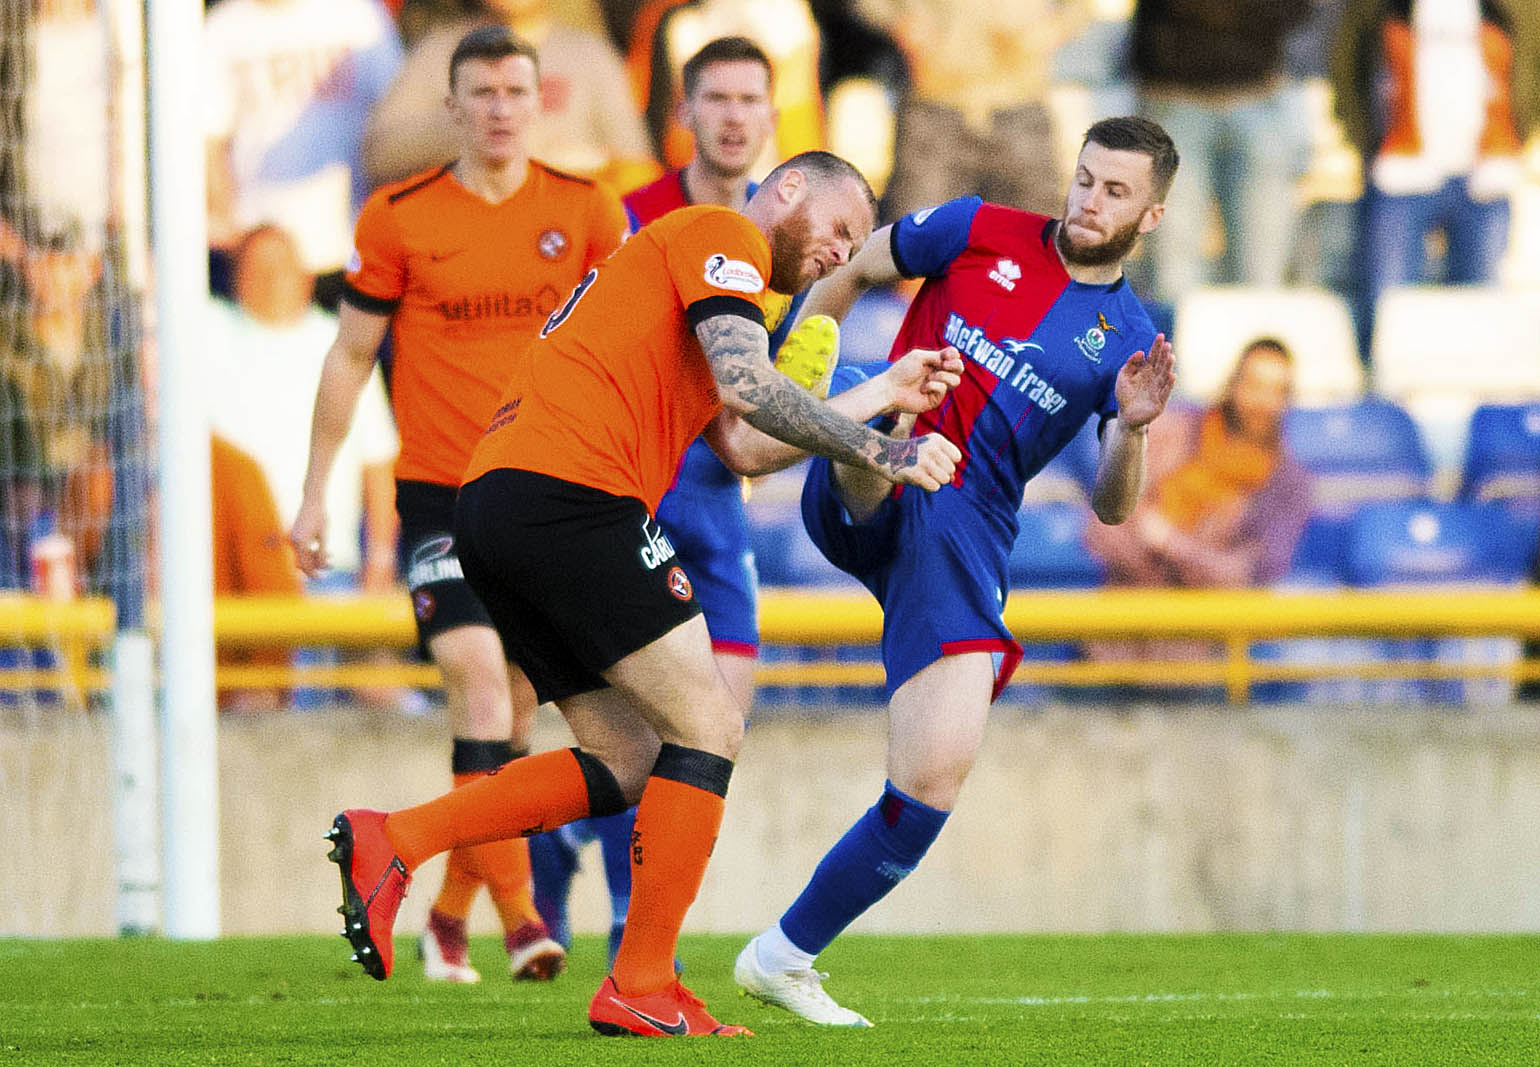 Liam Polworth was sent off for this challenge on Mark Connolly.